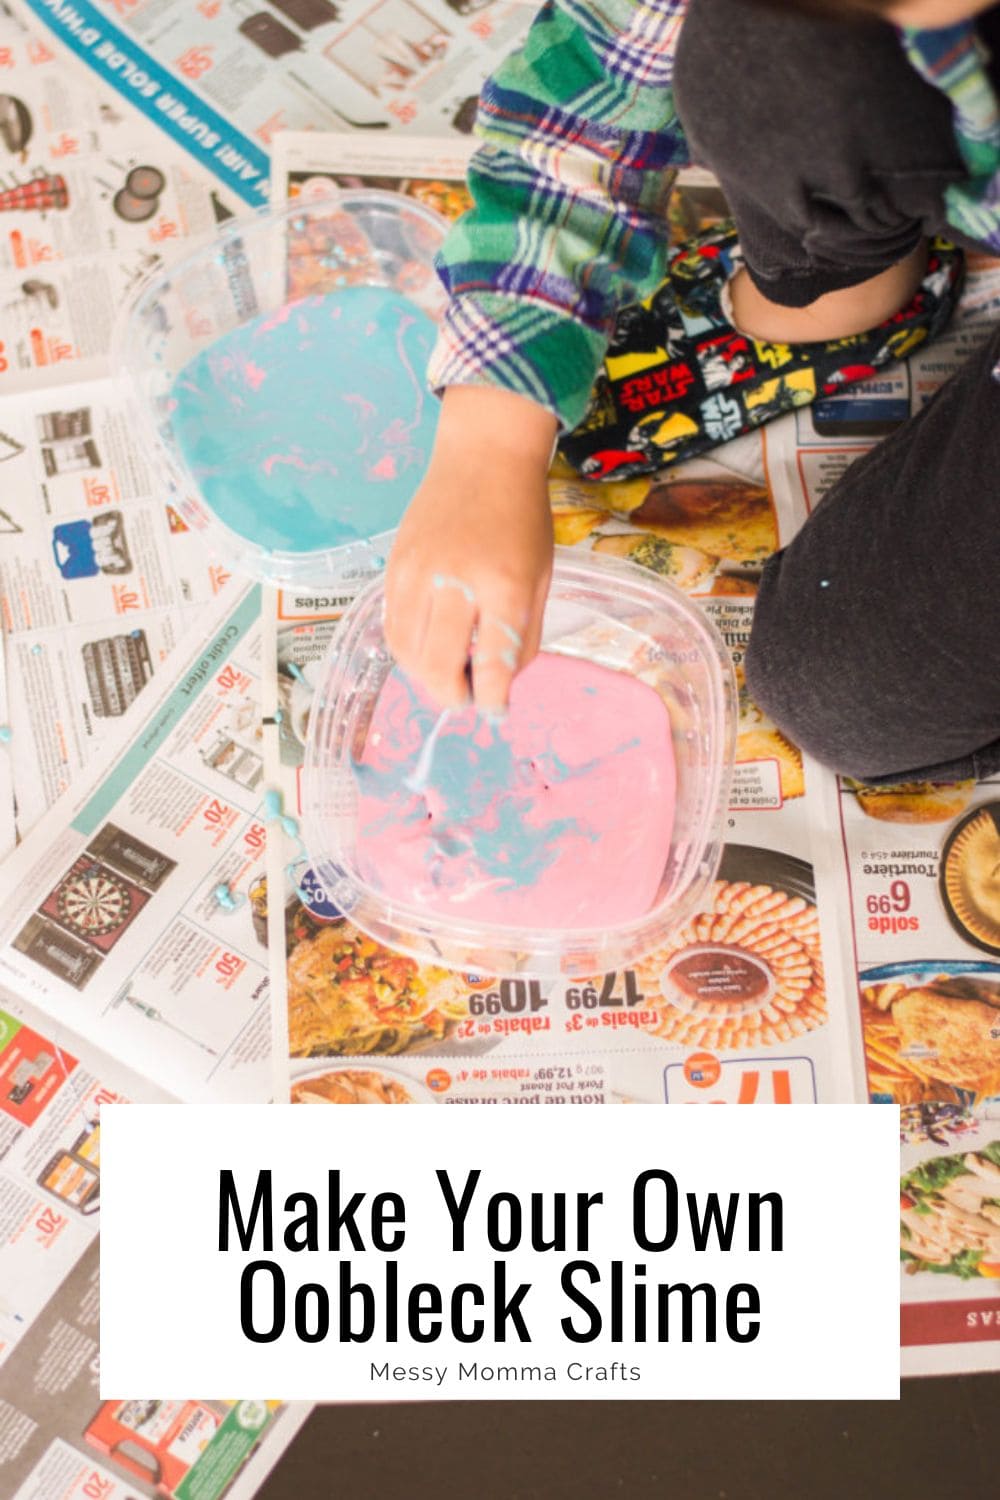 Make your own oobleck slime in pink and blue.